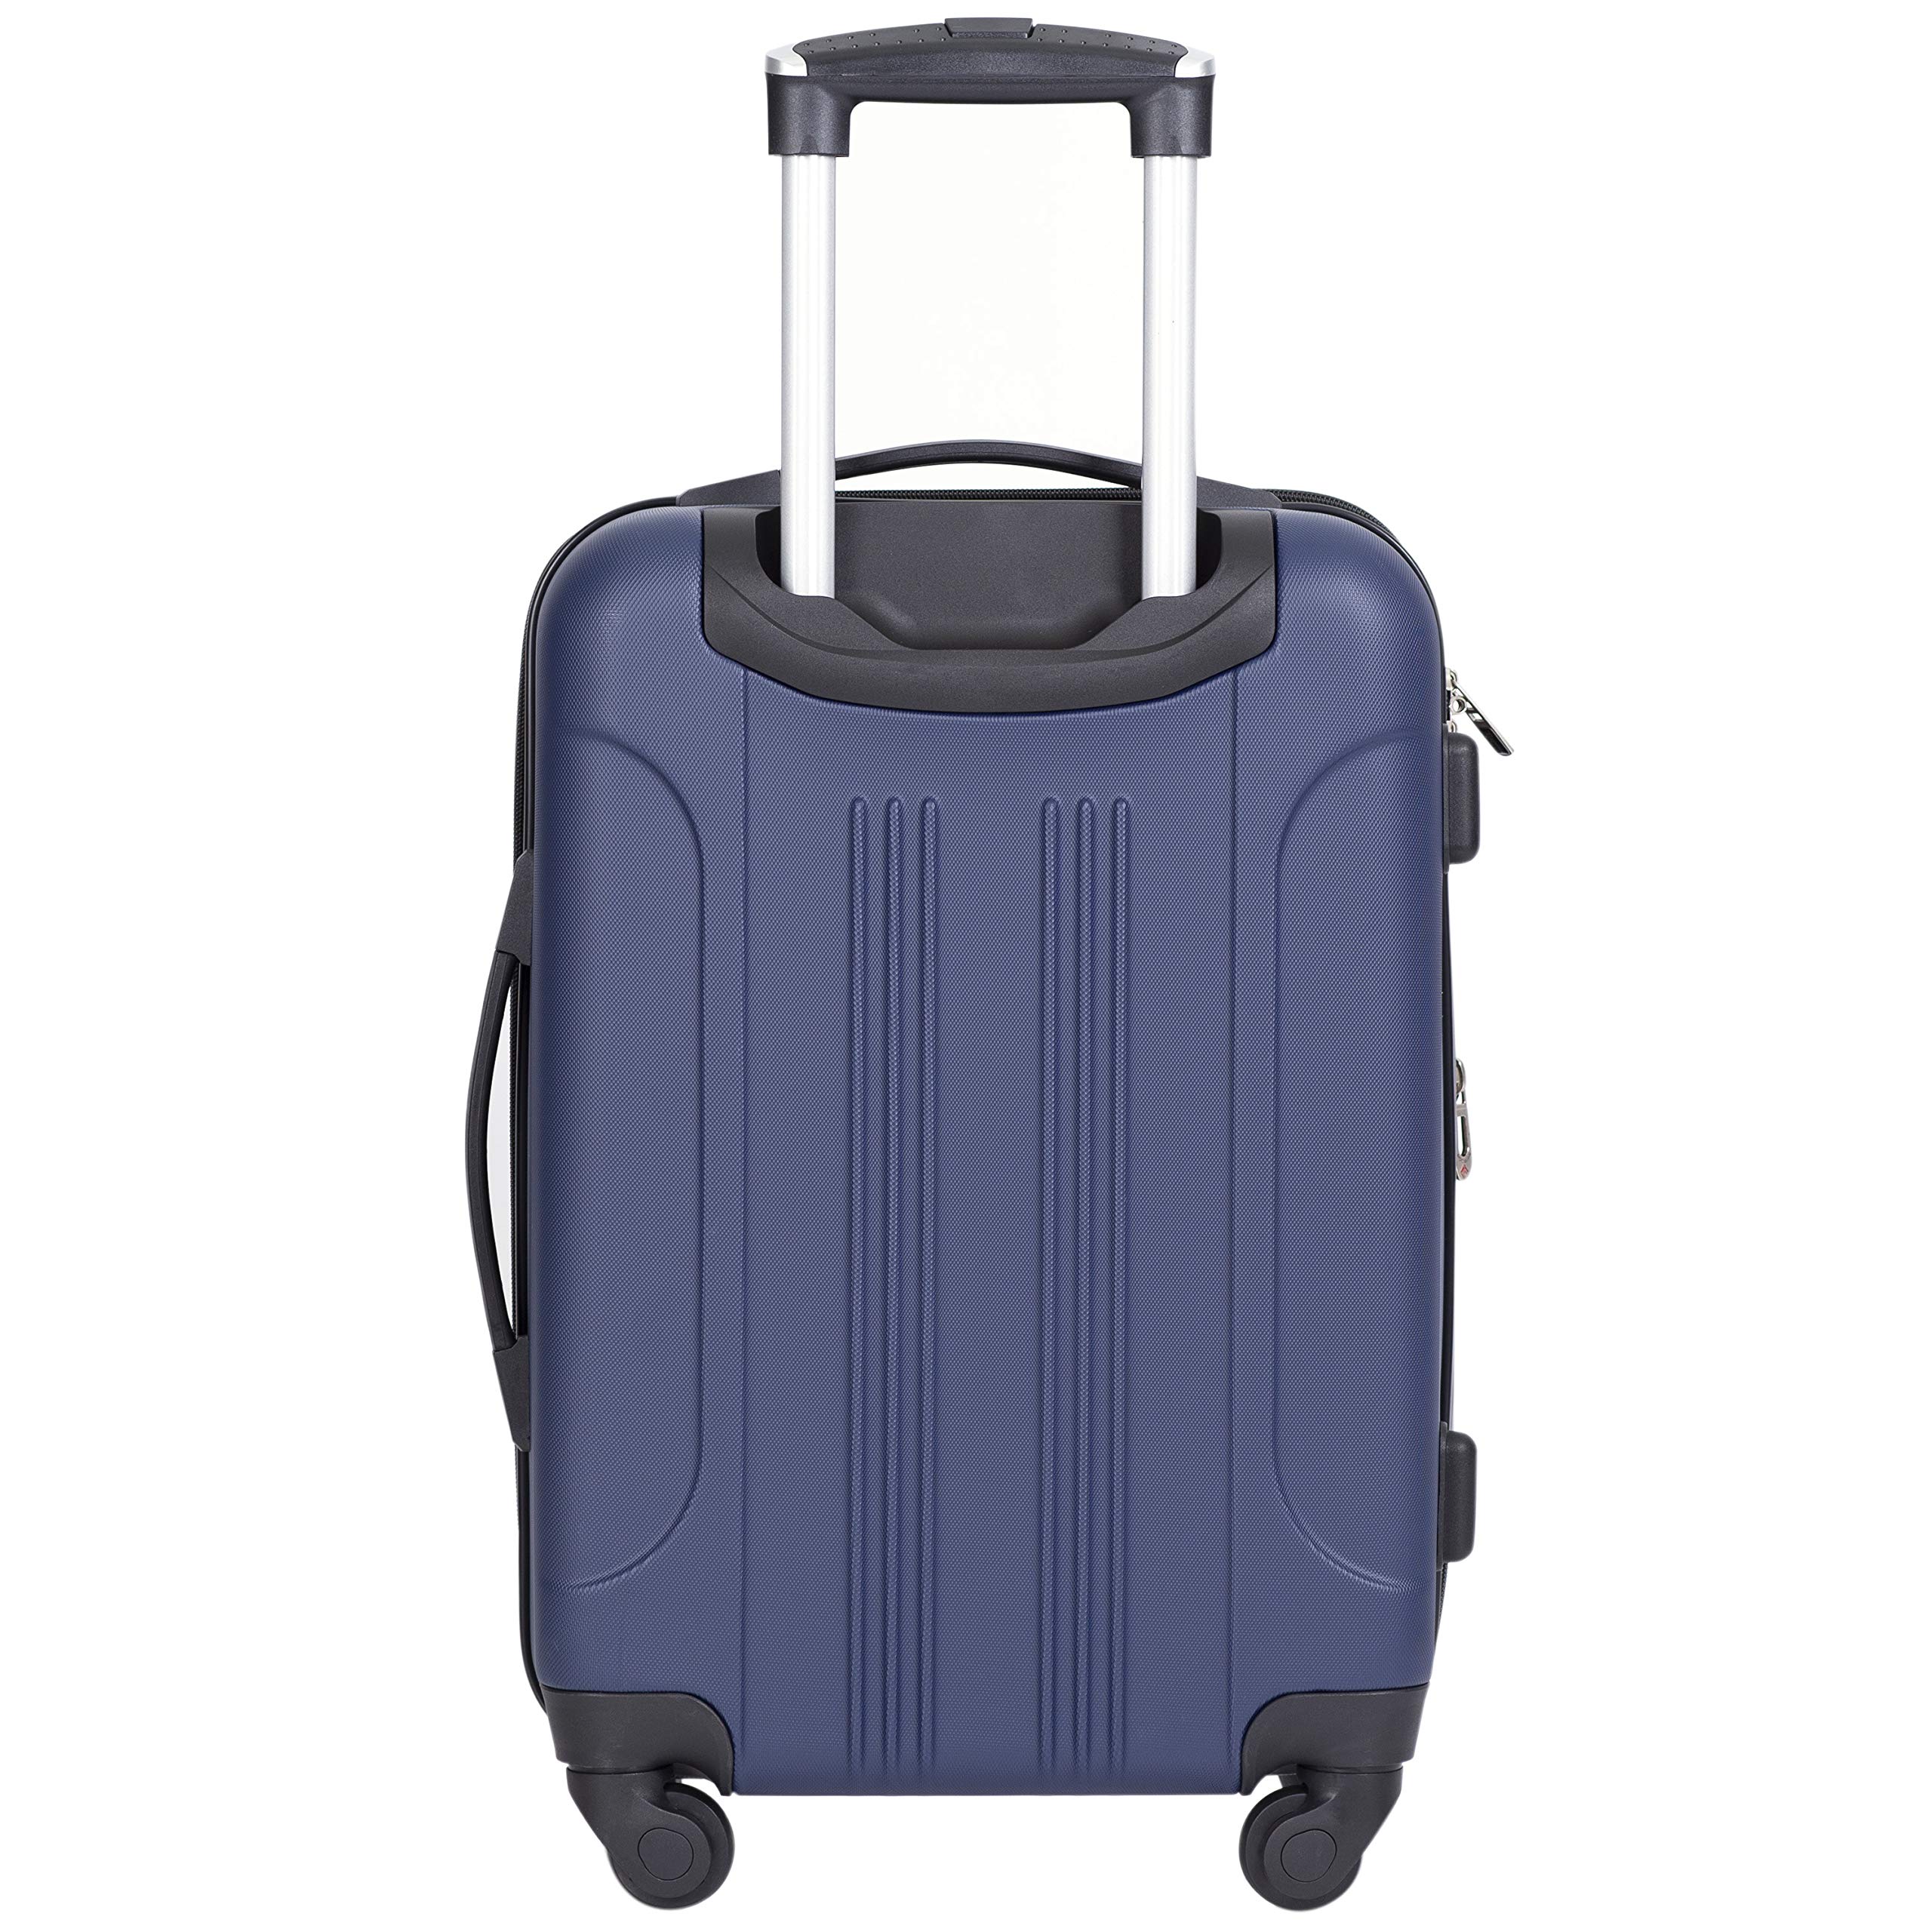 Travelers Club Chicago Hardside Expandable Spinner Luggages, Navy Blue, 20